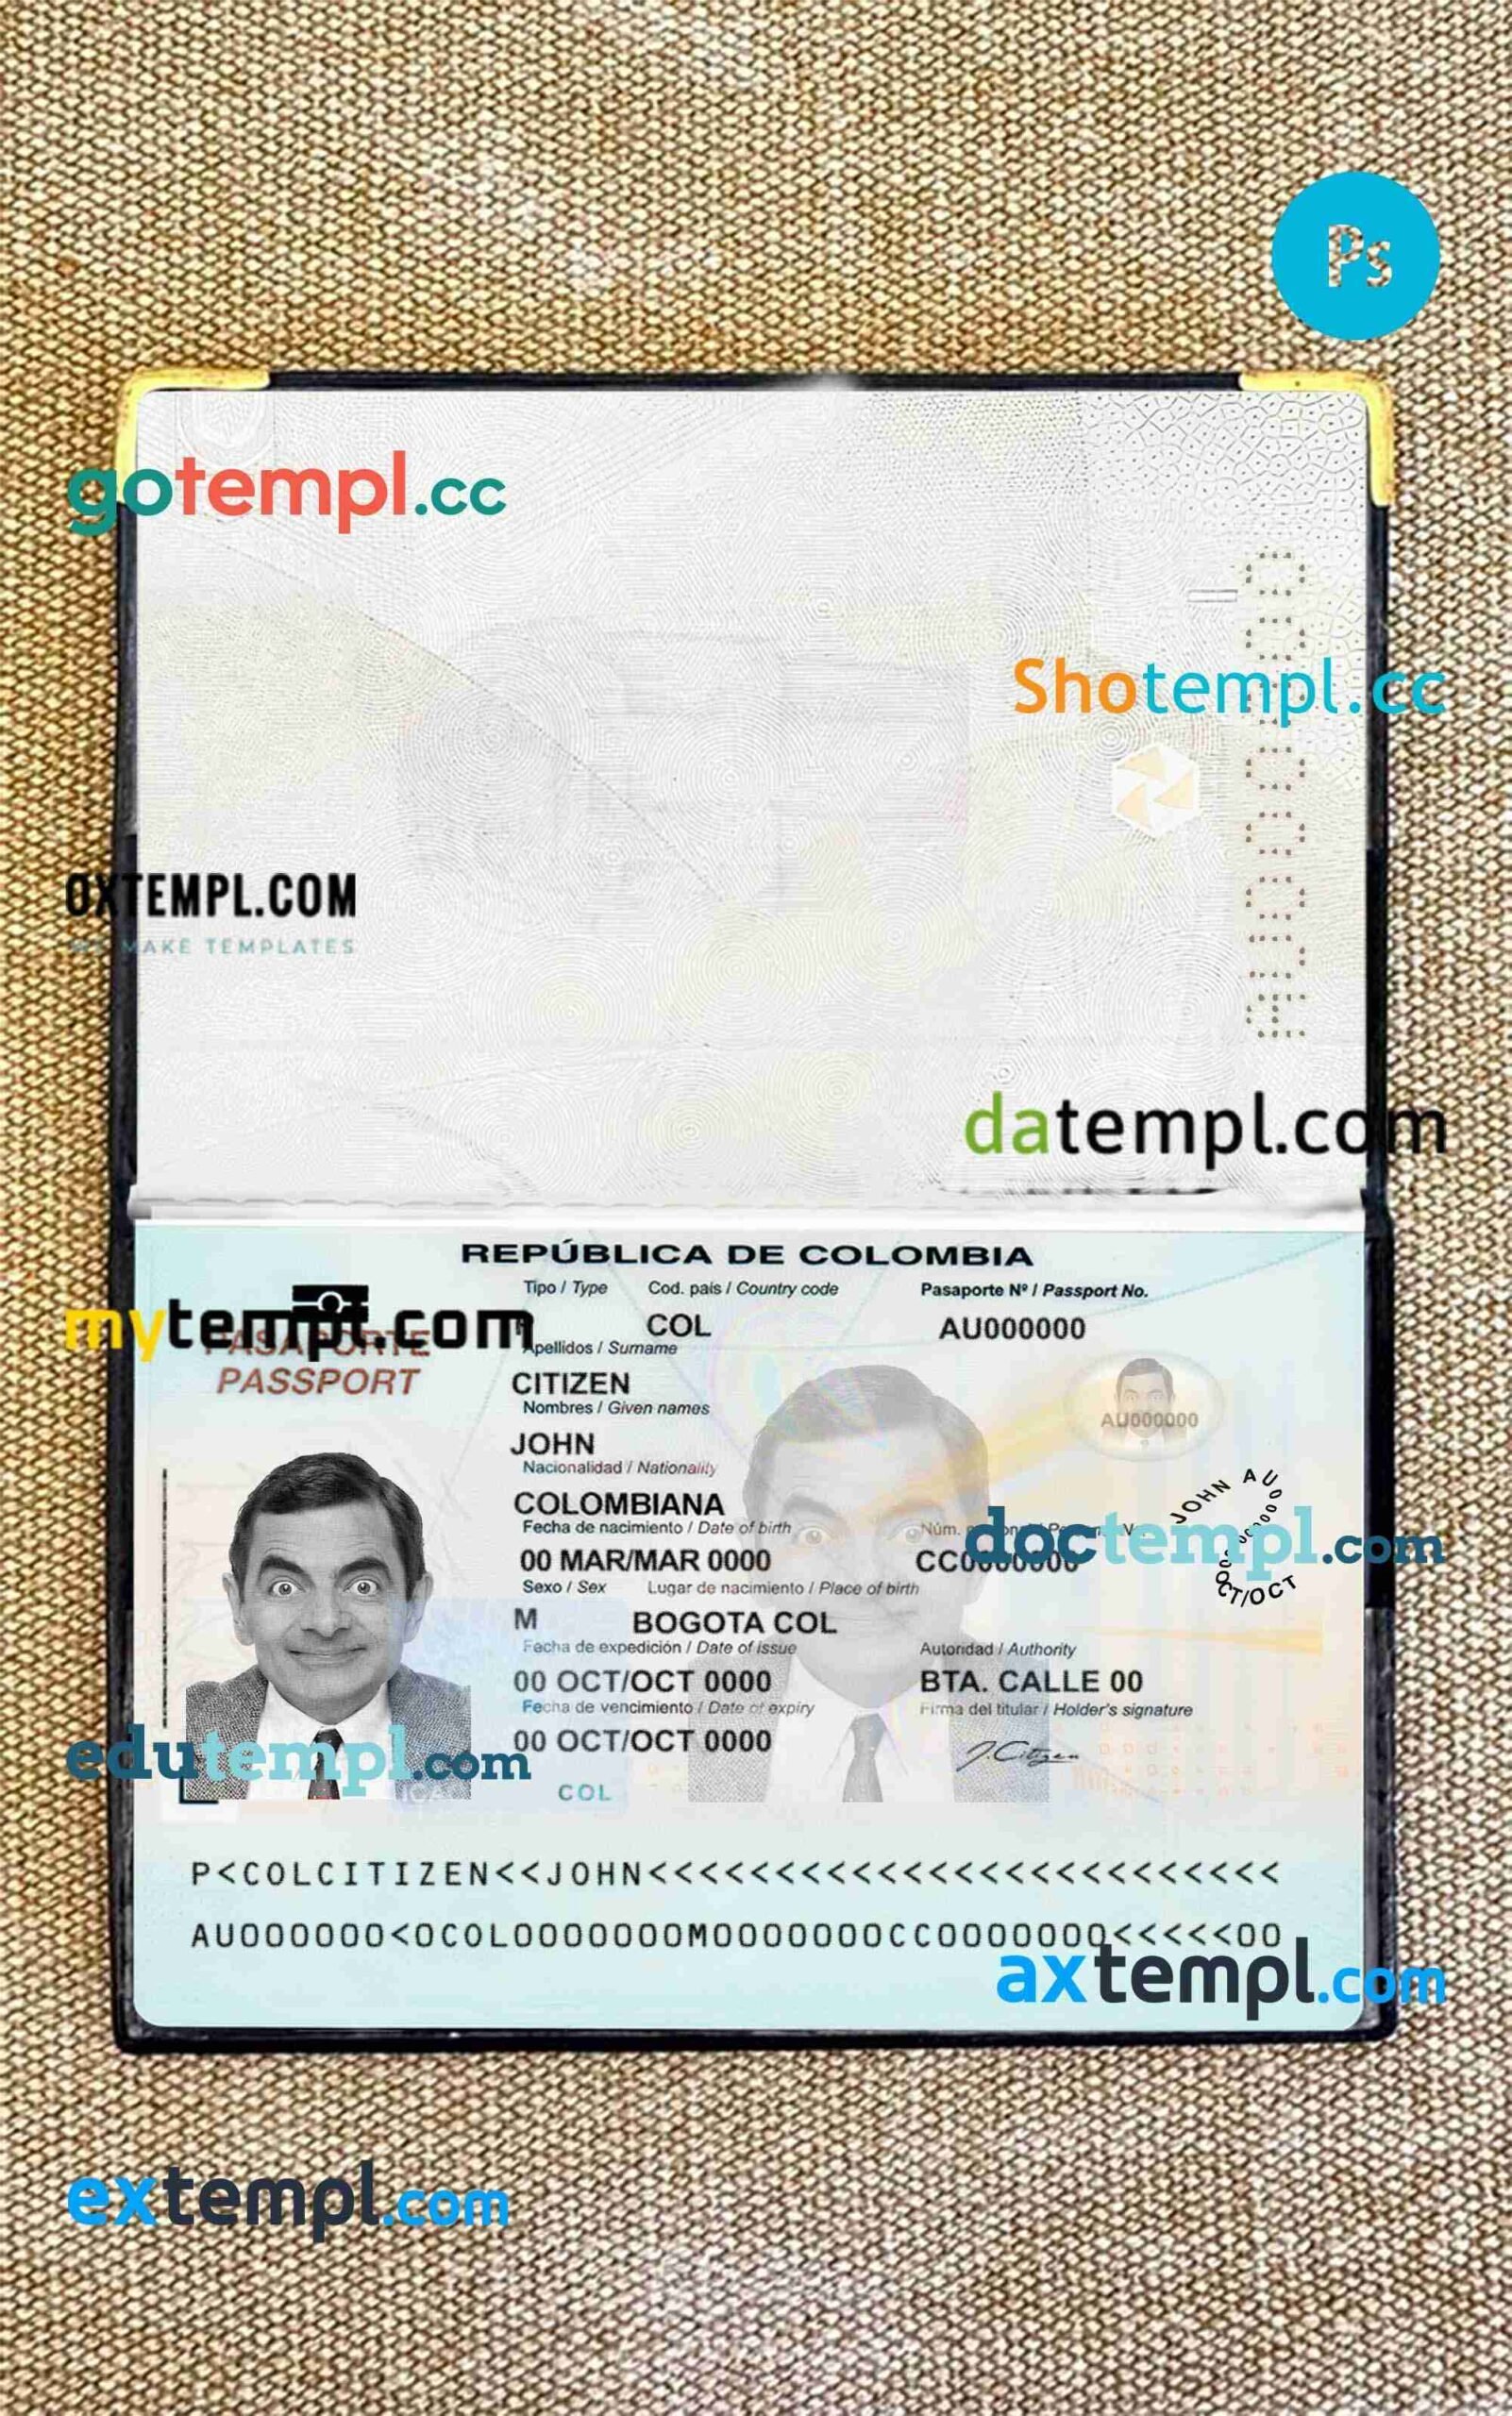 Nepal passport editable PSD files, scan and photo look templates, 2 in 1